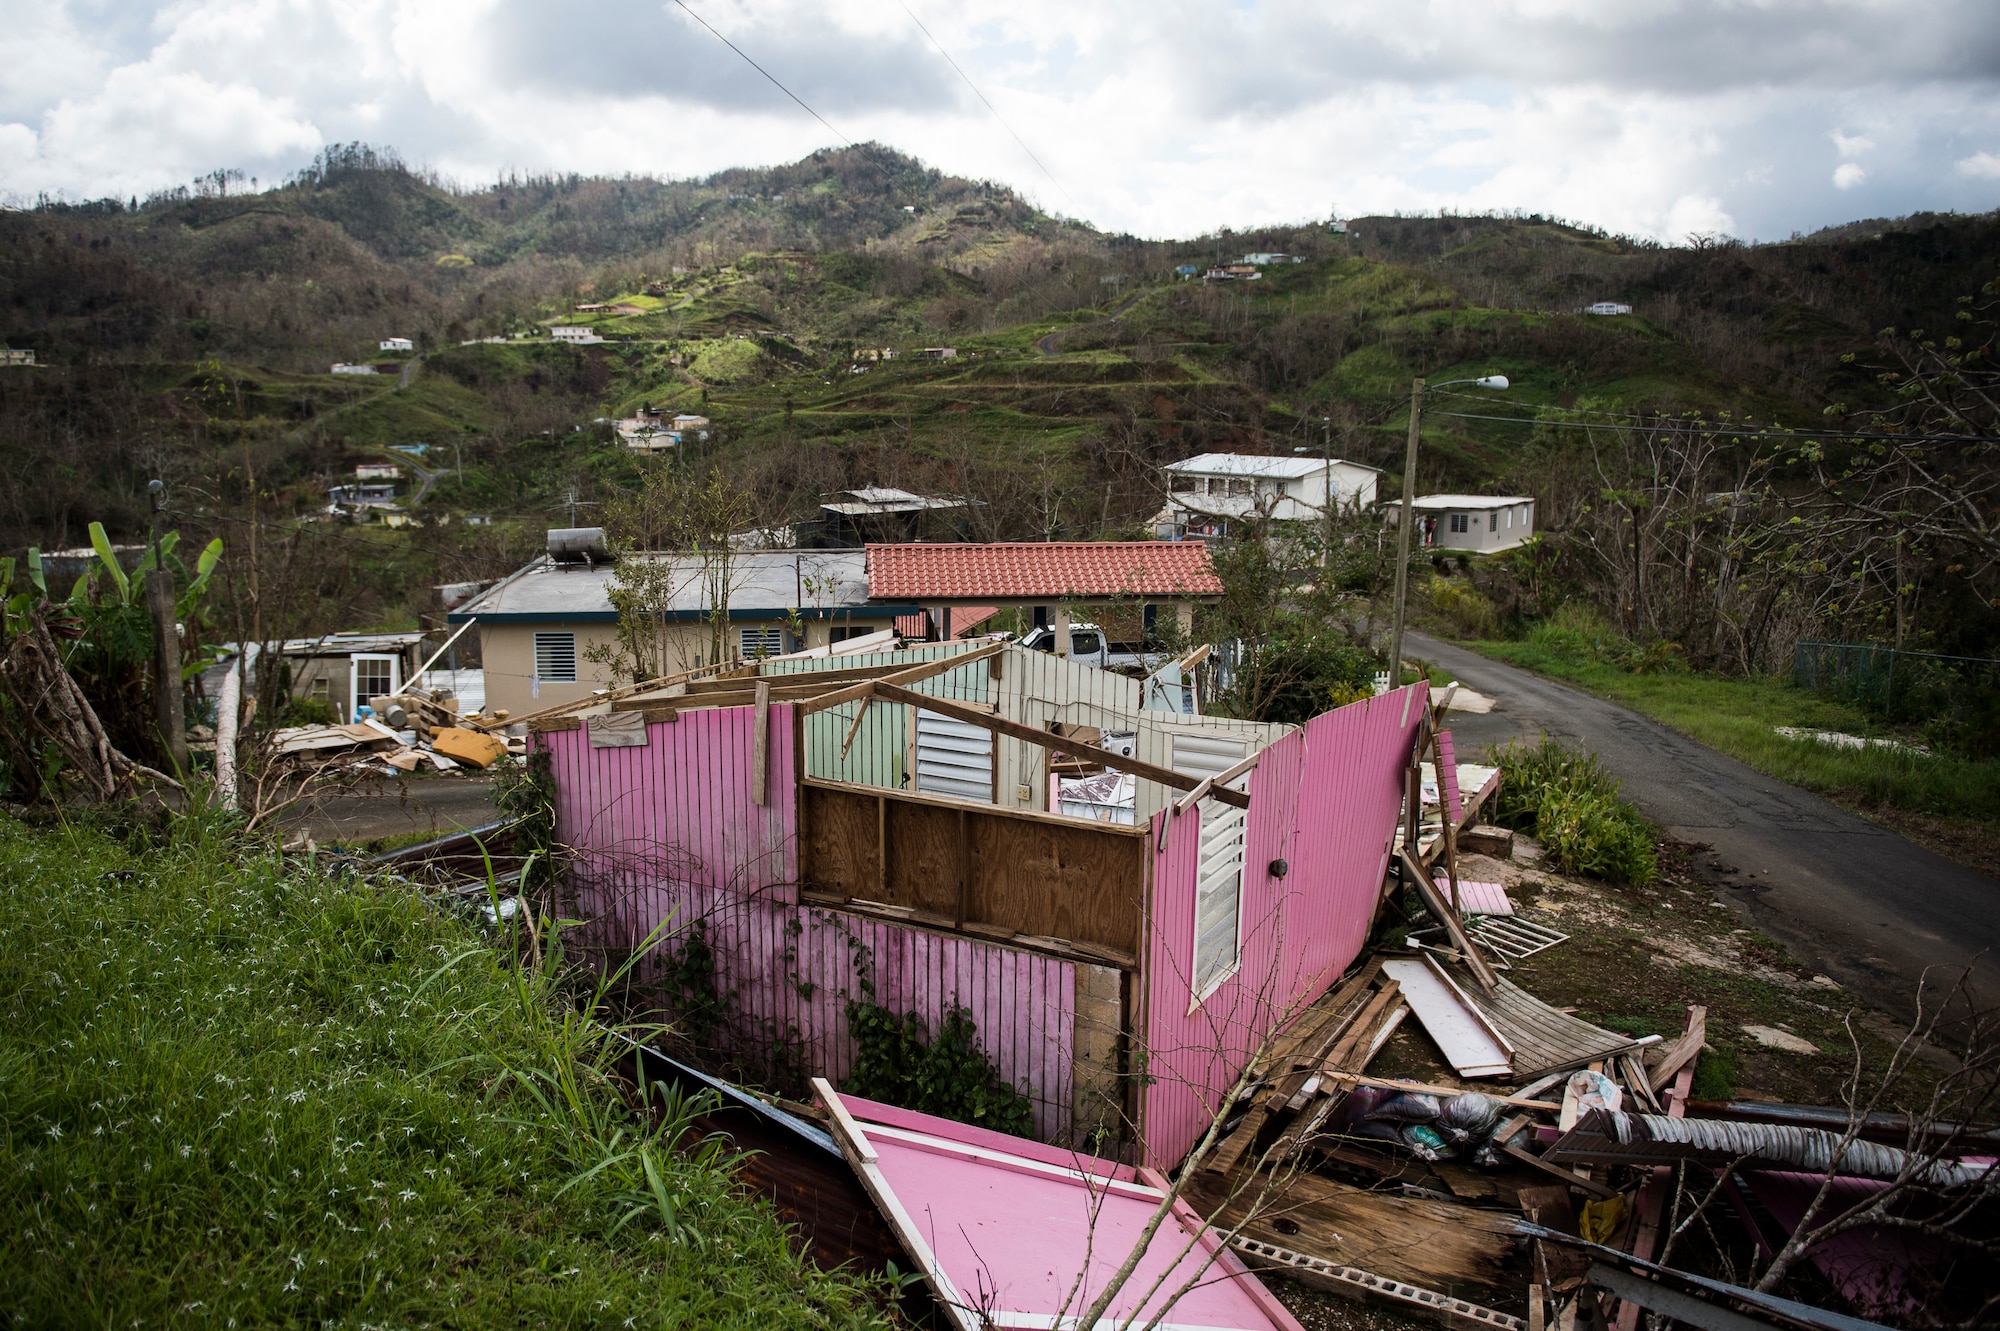 A damaged house in the municipality of Orocovis, Puerto Rico, Oct. 13, 2017. Hurricane Maria formed in the Atlantic Ocean and affected islands in the Caribbean Sea, including Puerto Rico and the U.S. Virgin Islands. U.S. military assets supported FEMA as well as state and local authorities in rescue and relief efforts. (U.S. Air Force photo by Tech. Sgt. Larry E. Reid Jr.)